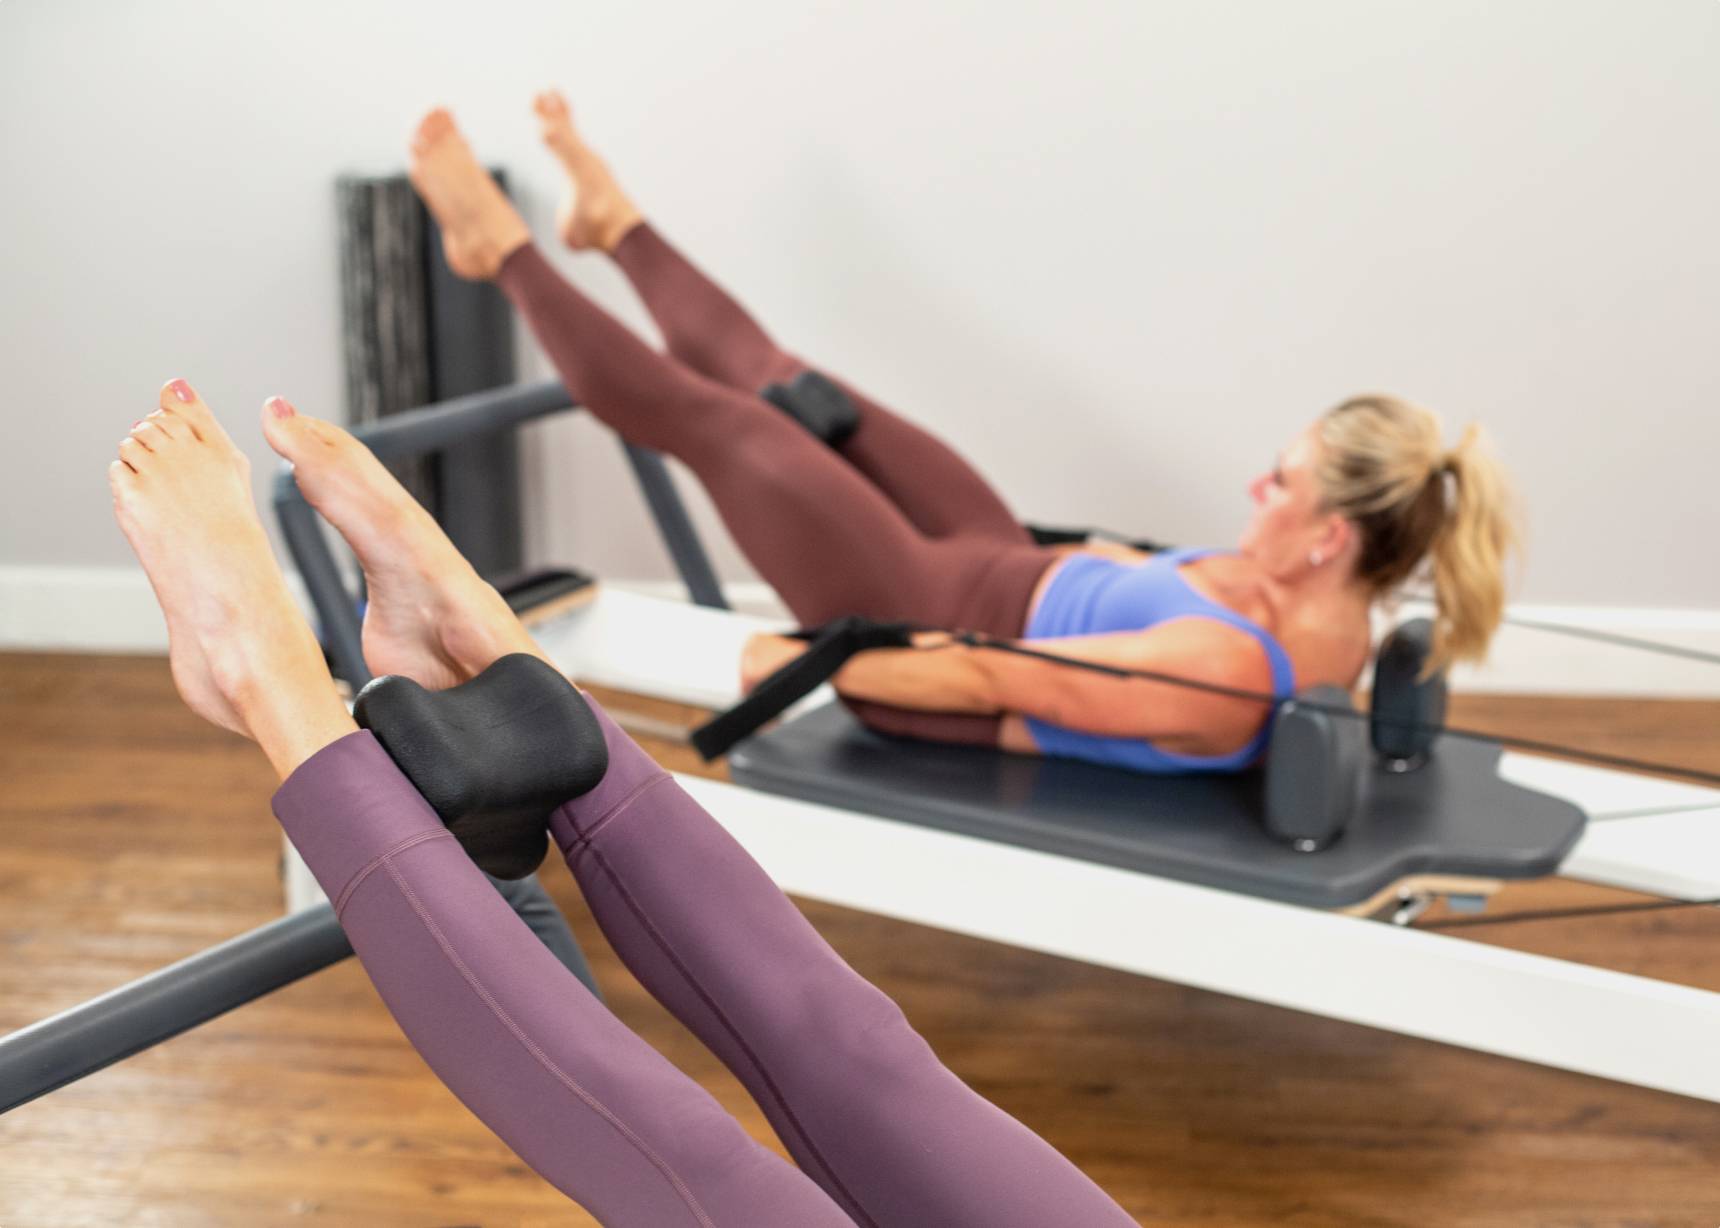 Reformer workout using The Aligner to help with positioning.